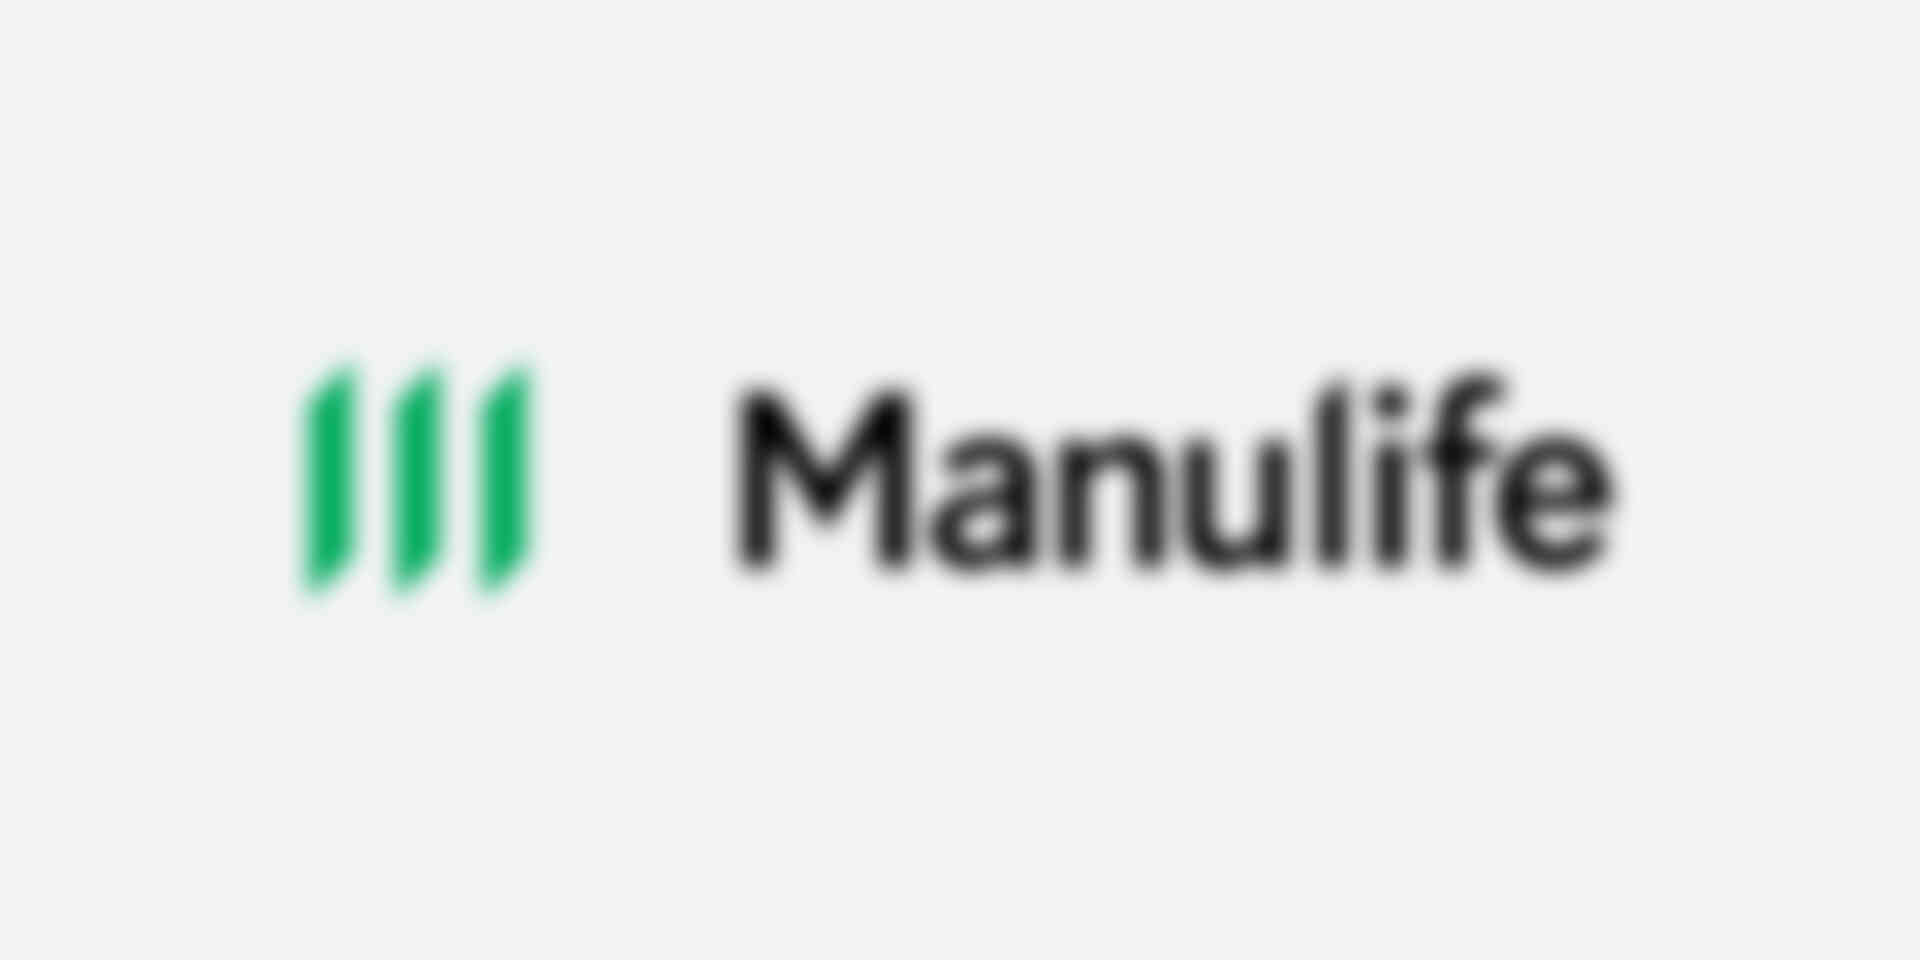 Our clients - financial-insurance-manulife